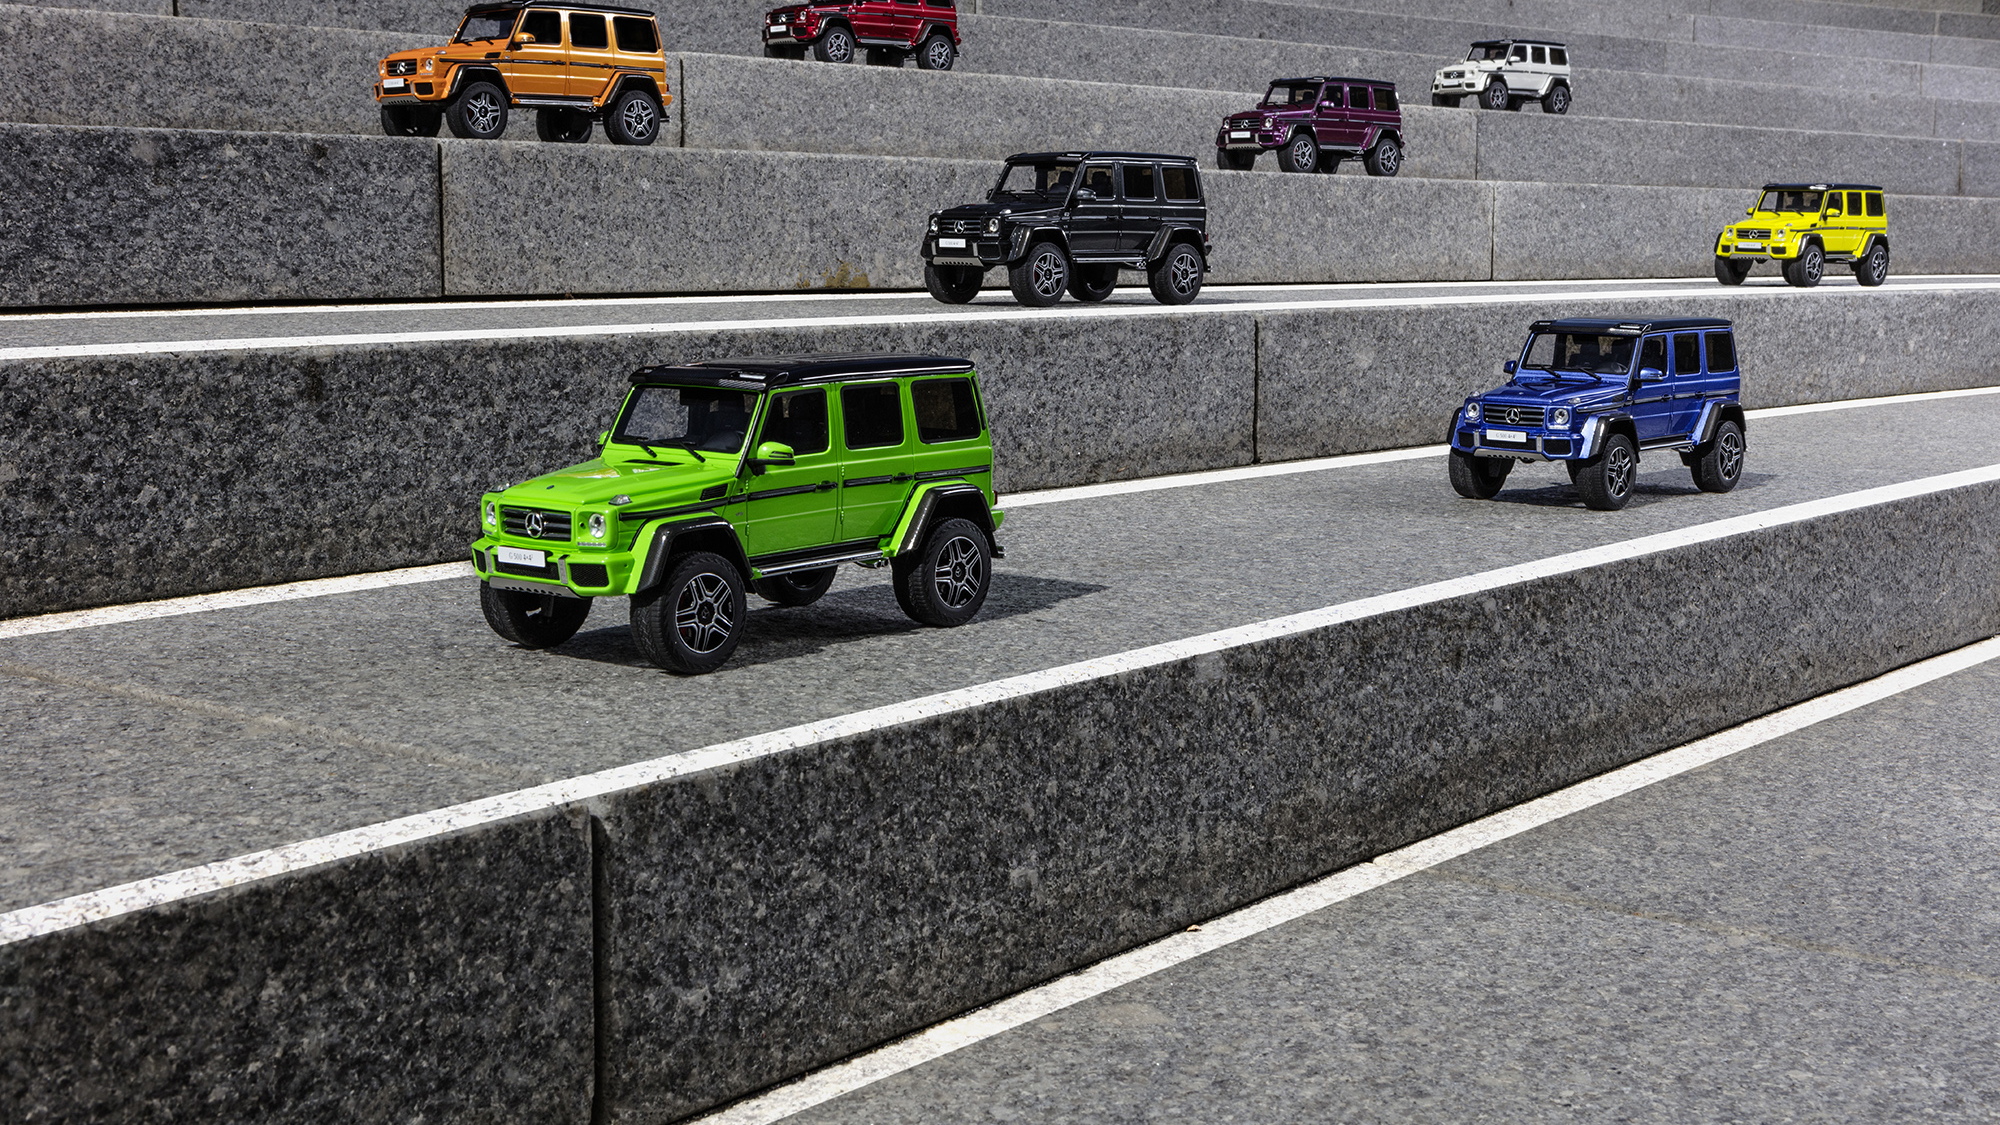 GT Spirit is offering the Mercedes-Benz G500 4x4² in 1:18 scale